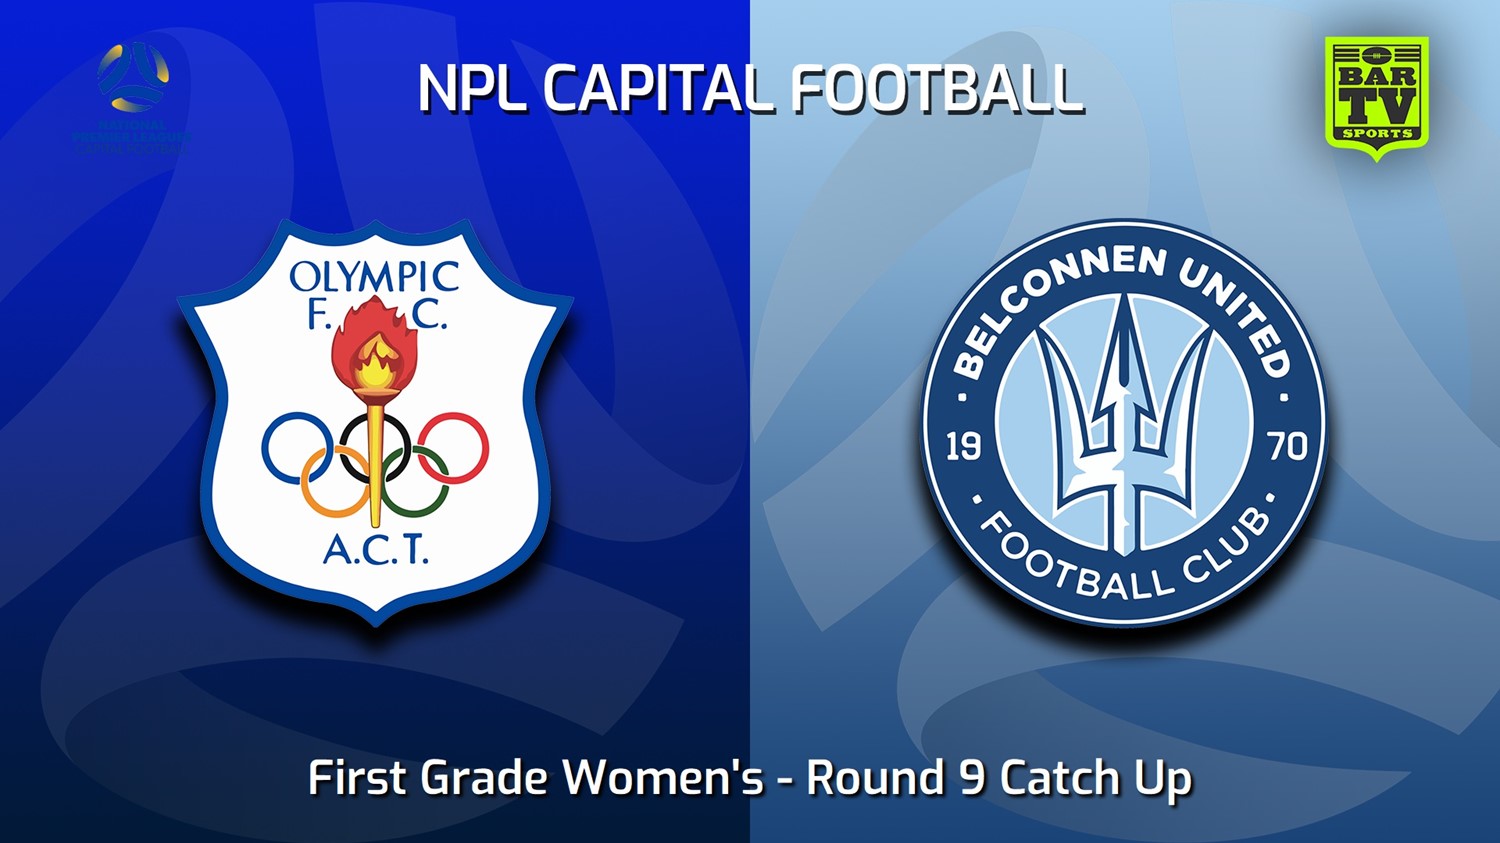 230823-Capital Womens Round 9 Catch Up - Canberra Olympic FC (women) v Belconnen United (women) Minigame Slate Image